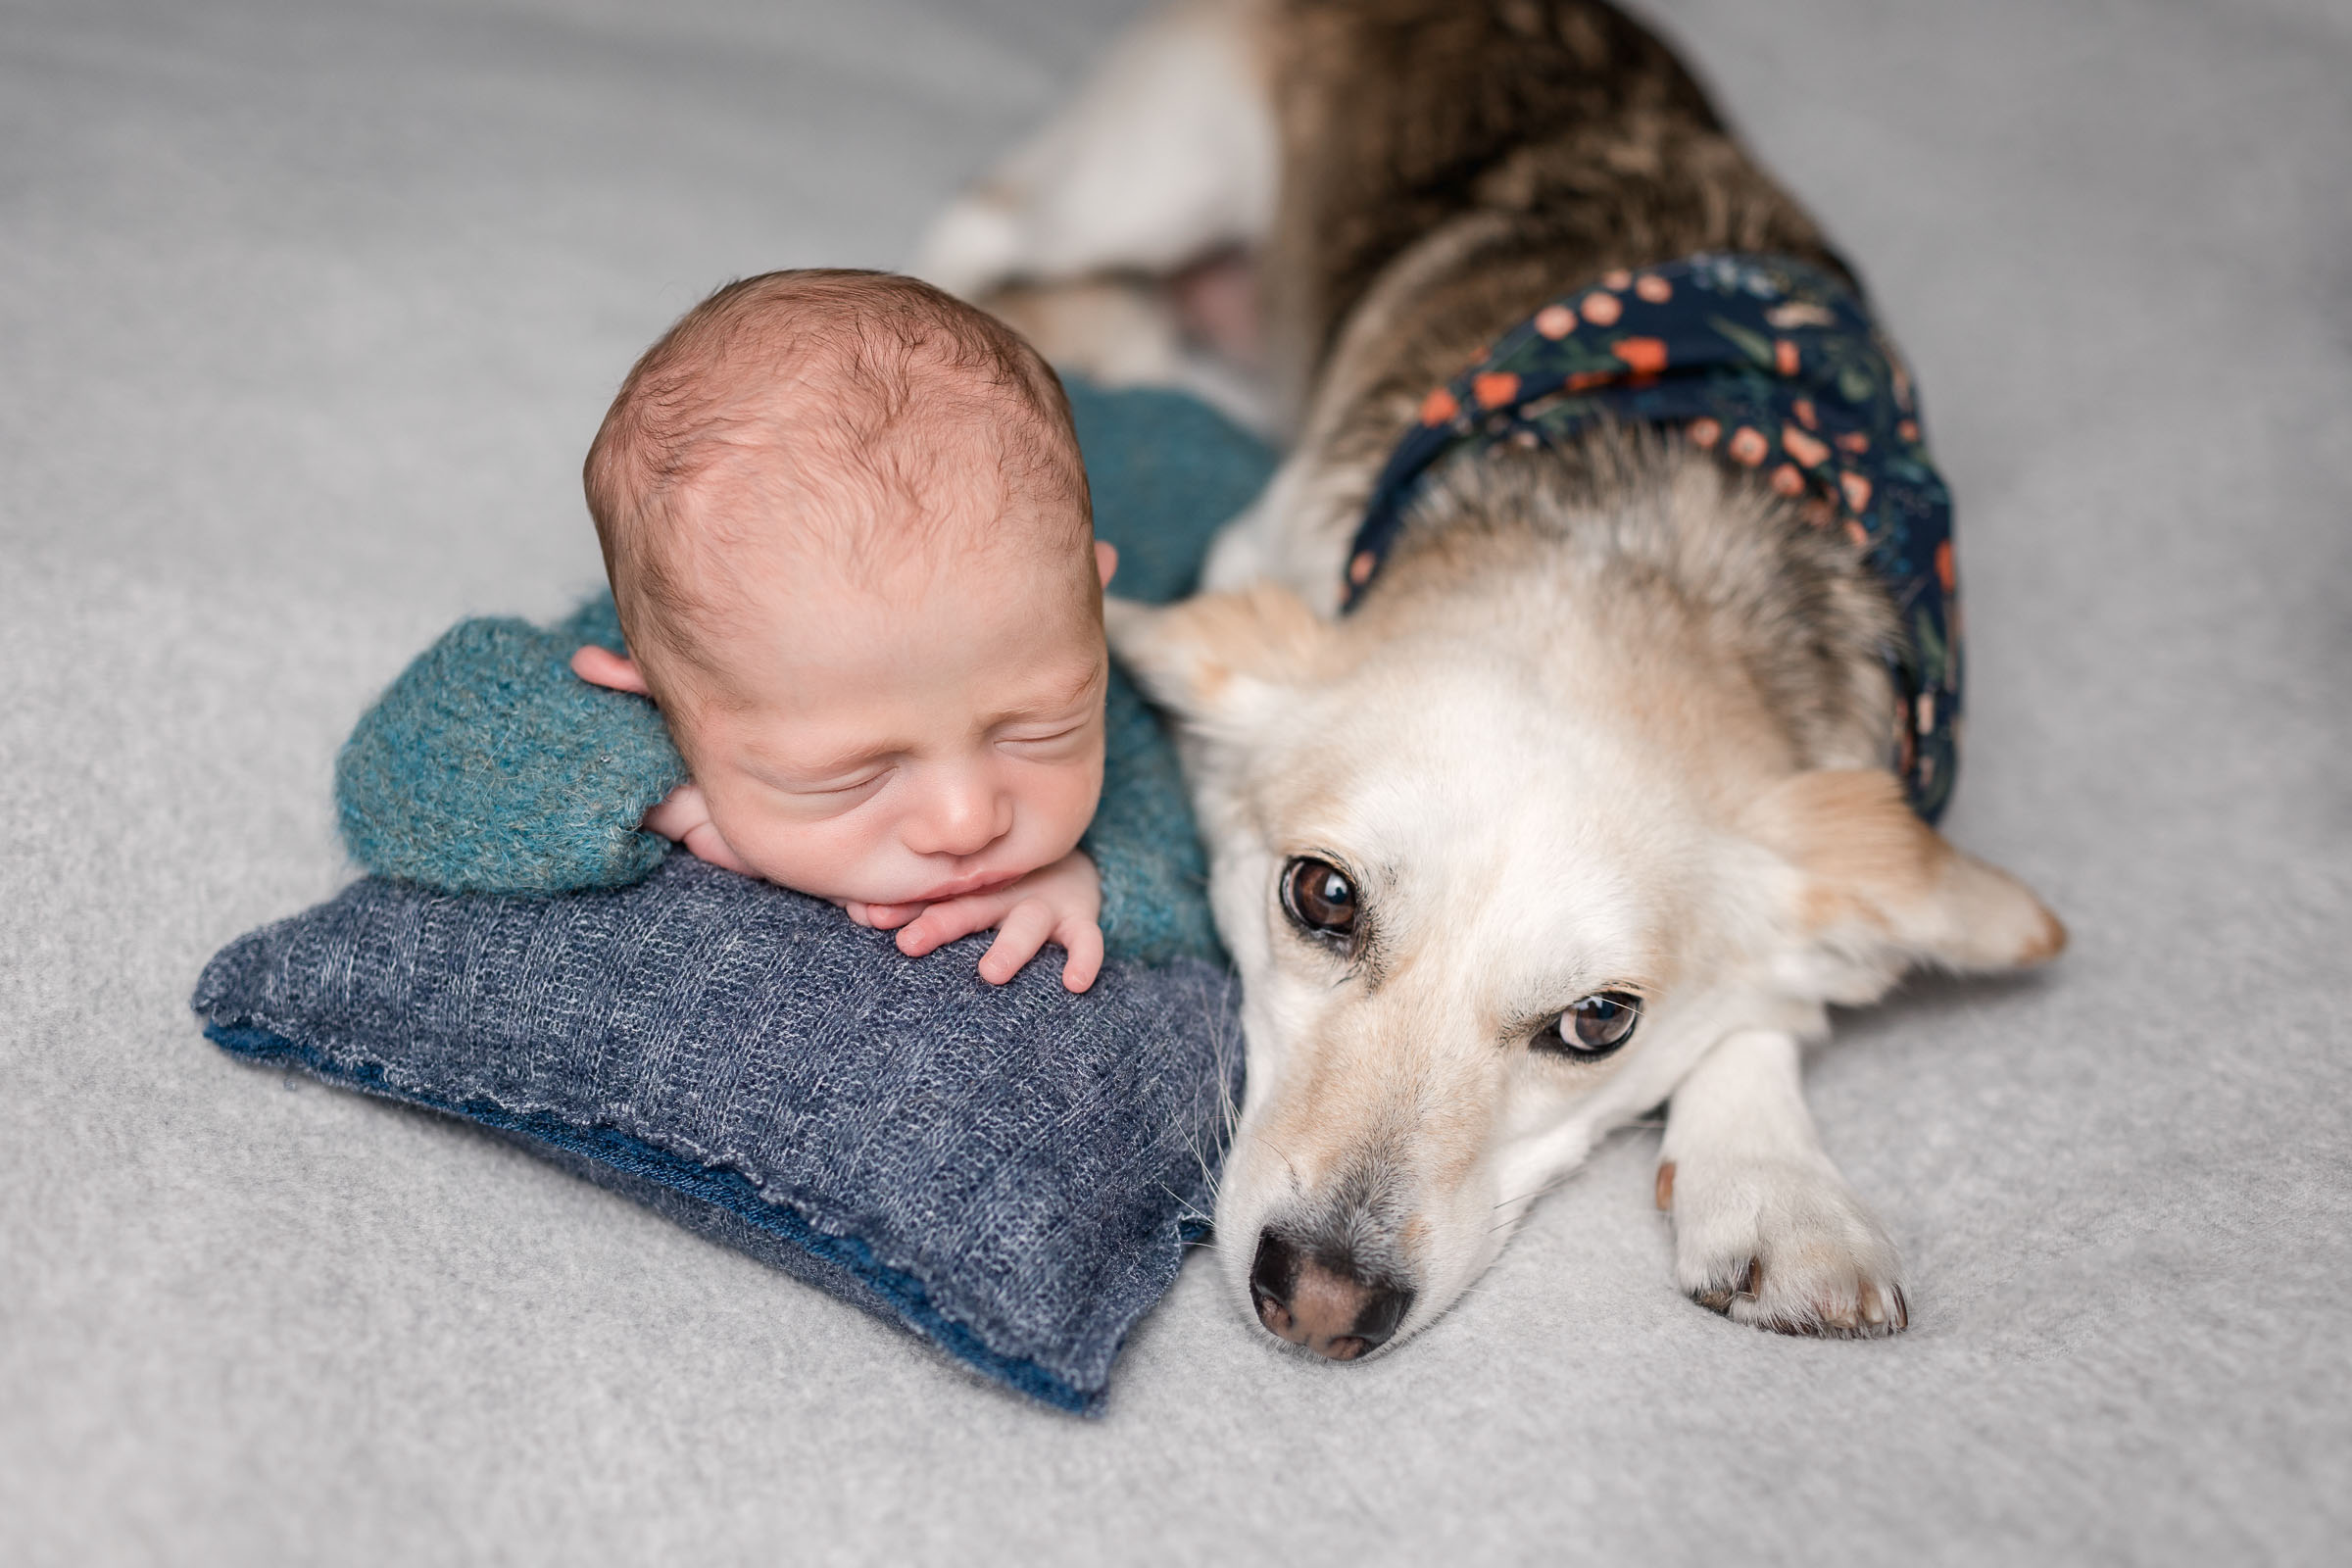 Innocent looking dog with big eyes laying down next to sleeping newborn baby for newborn pictures in San Diego